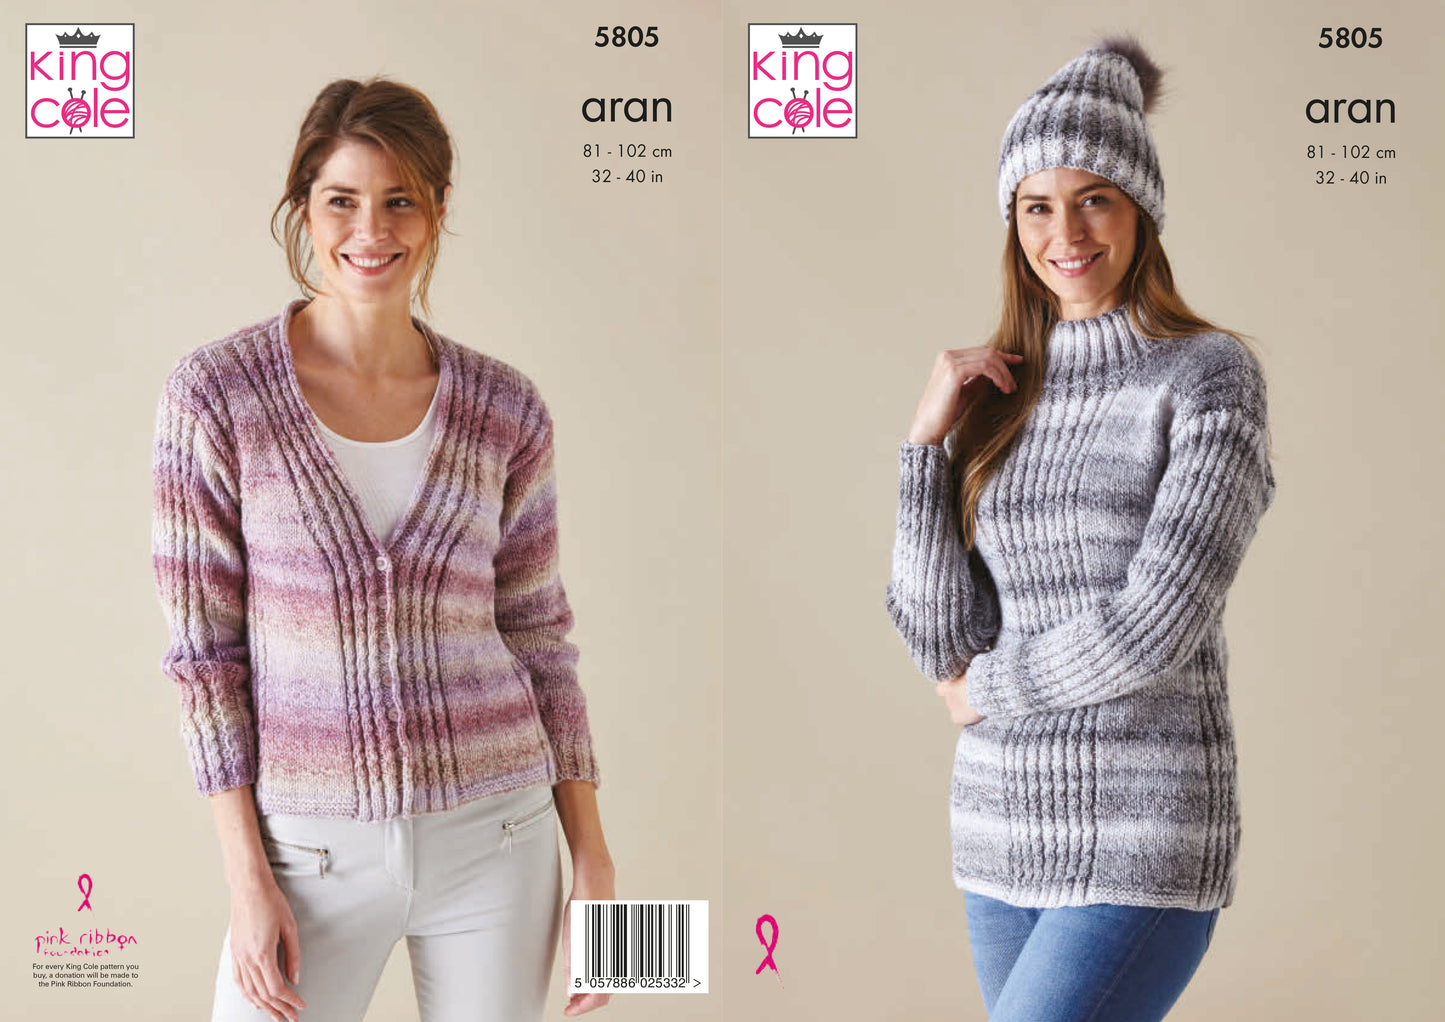 King Cole Acorn Pattern 5805 - Sweater, Cardigan and Hat